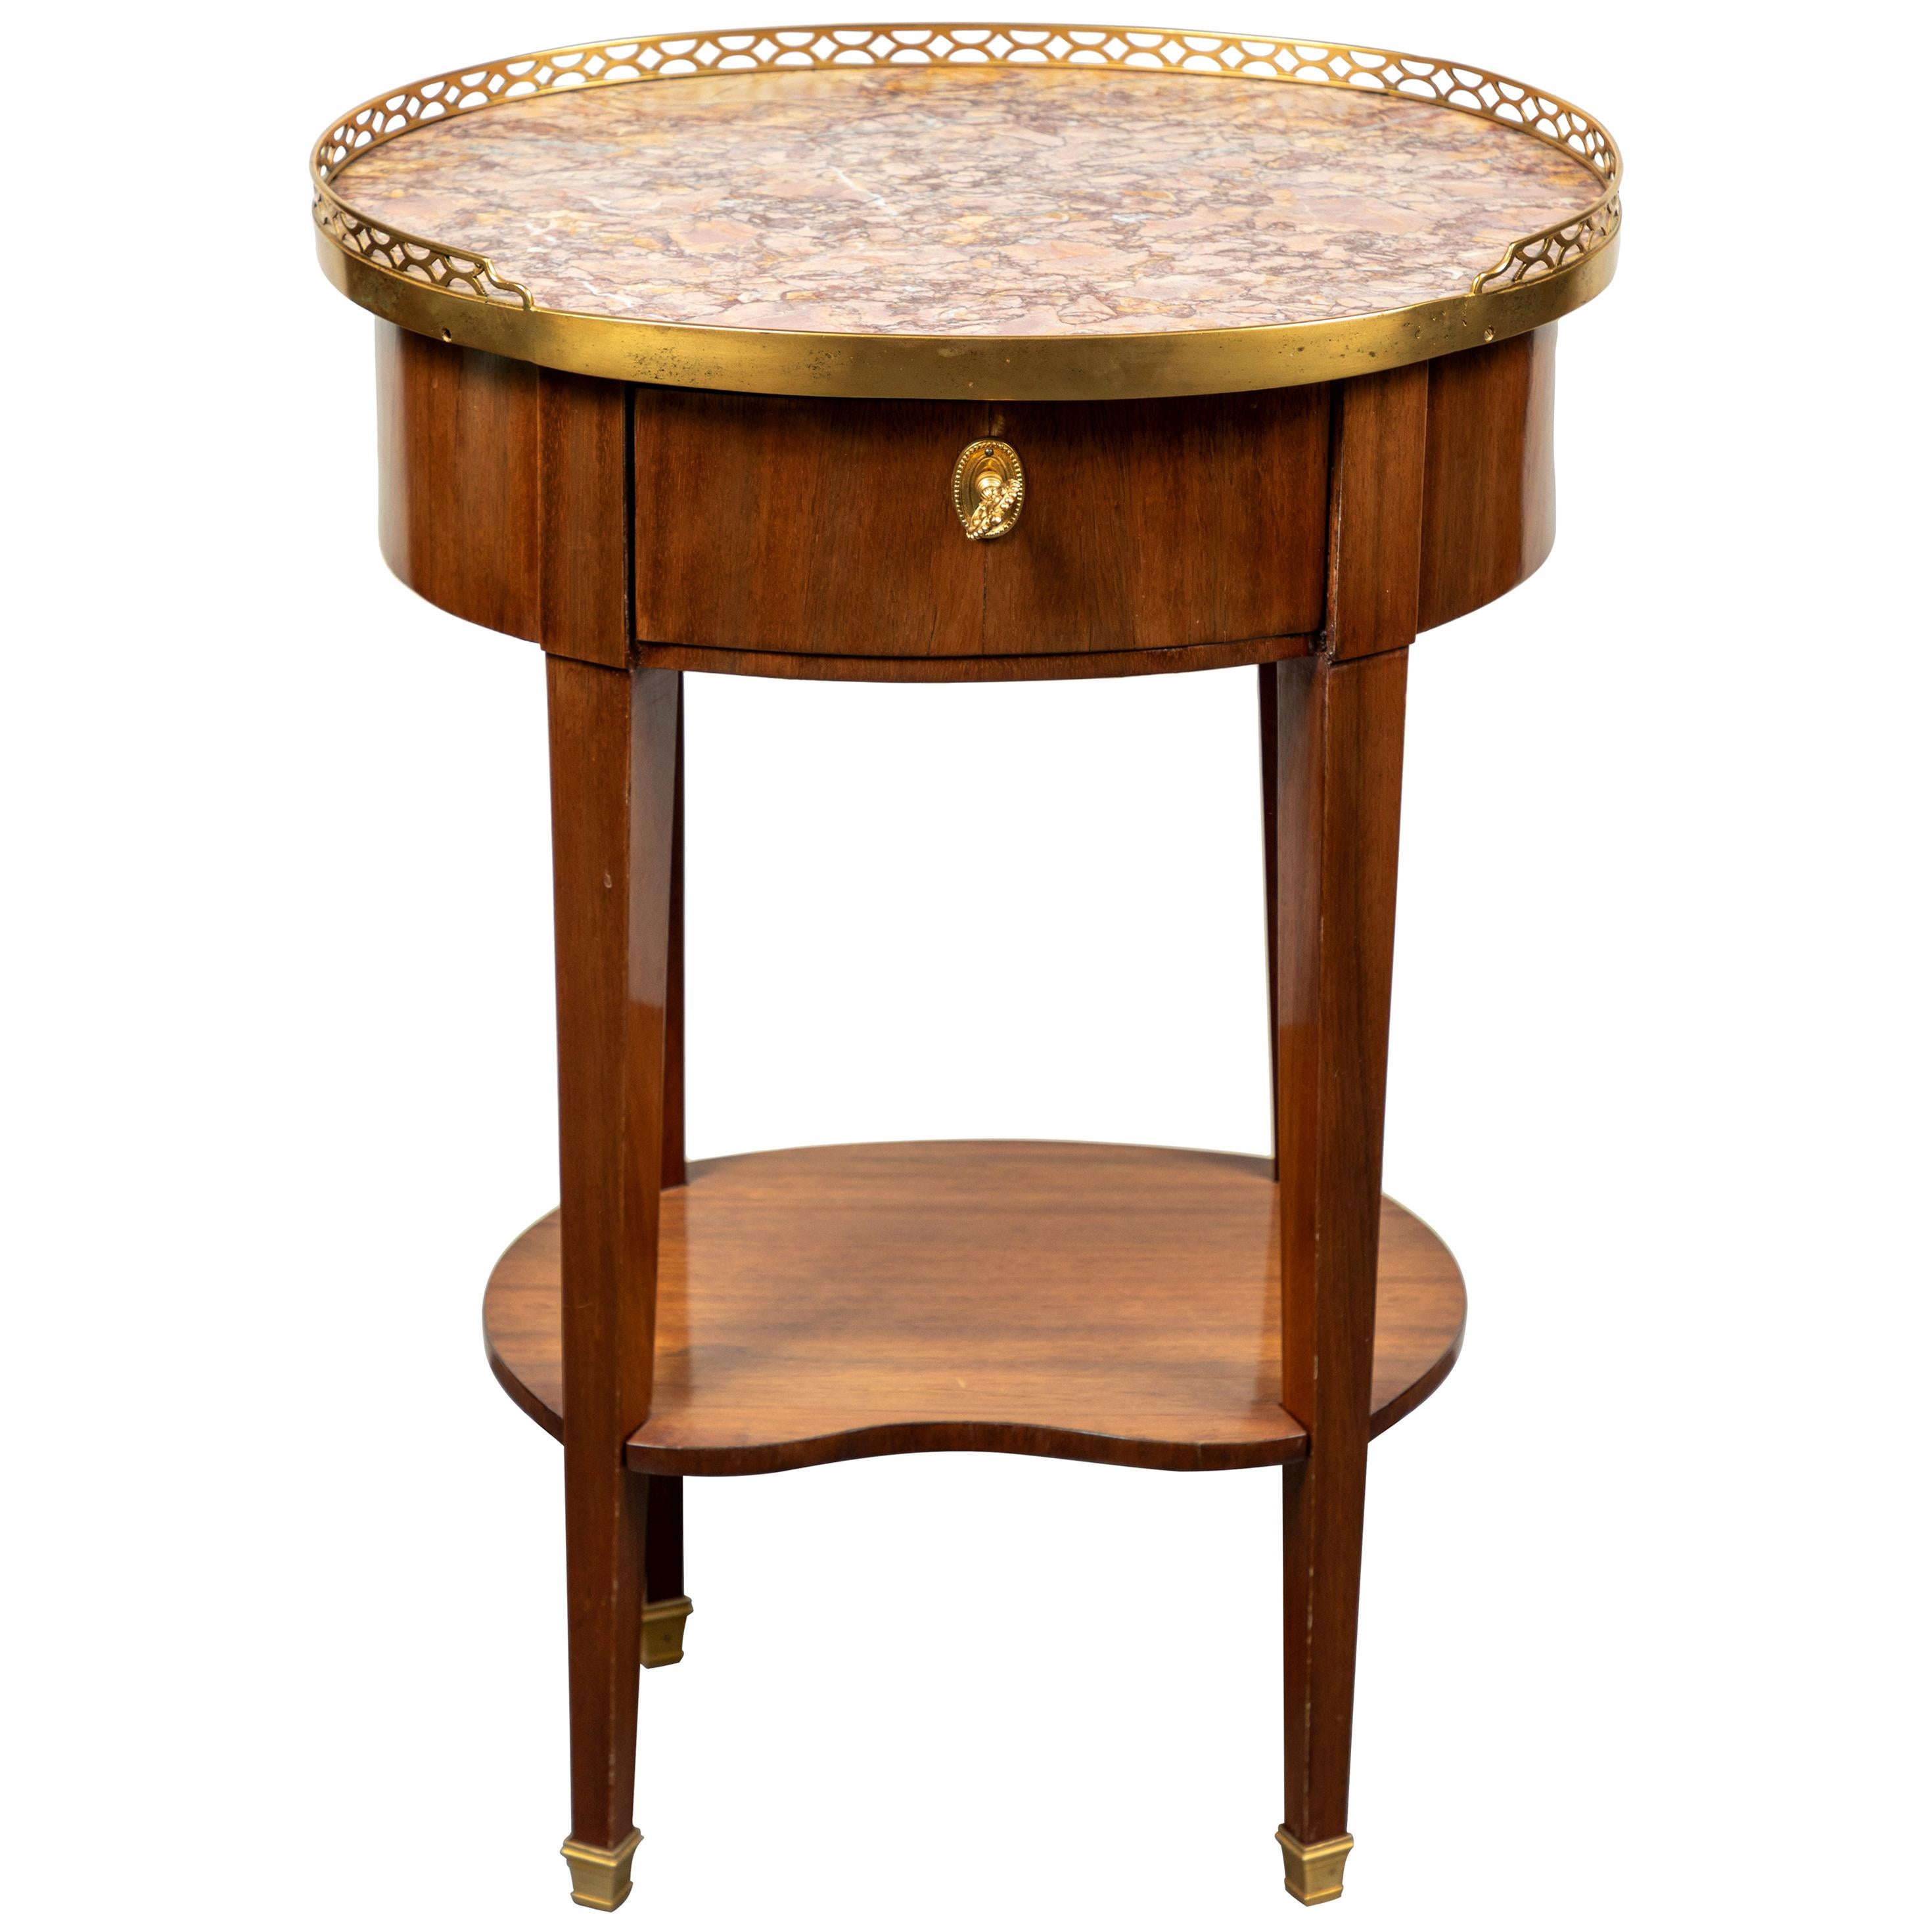 Period, Oval Side Table